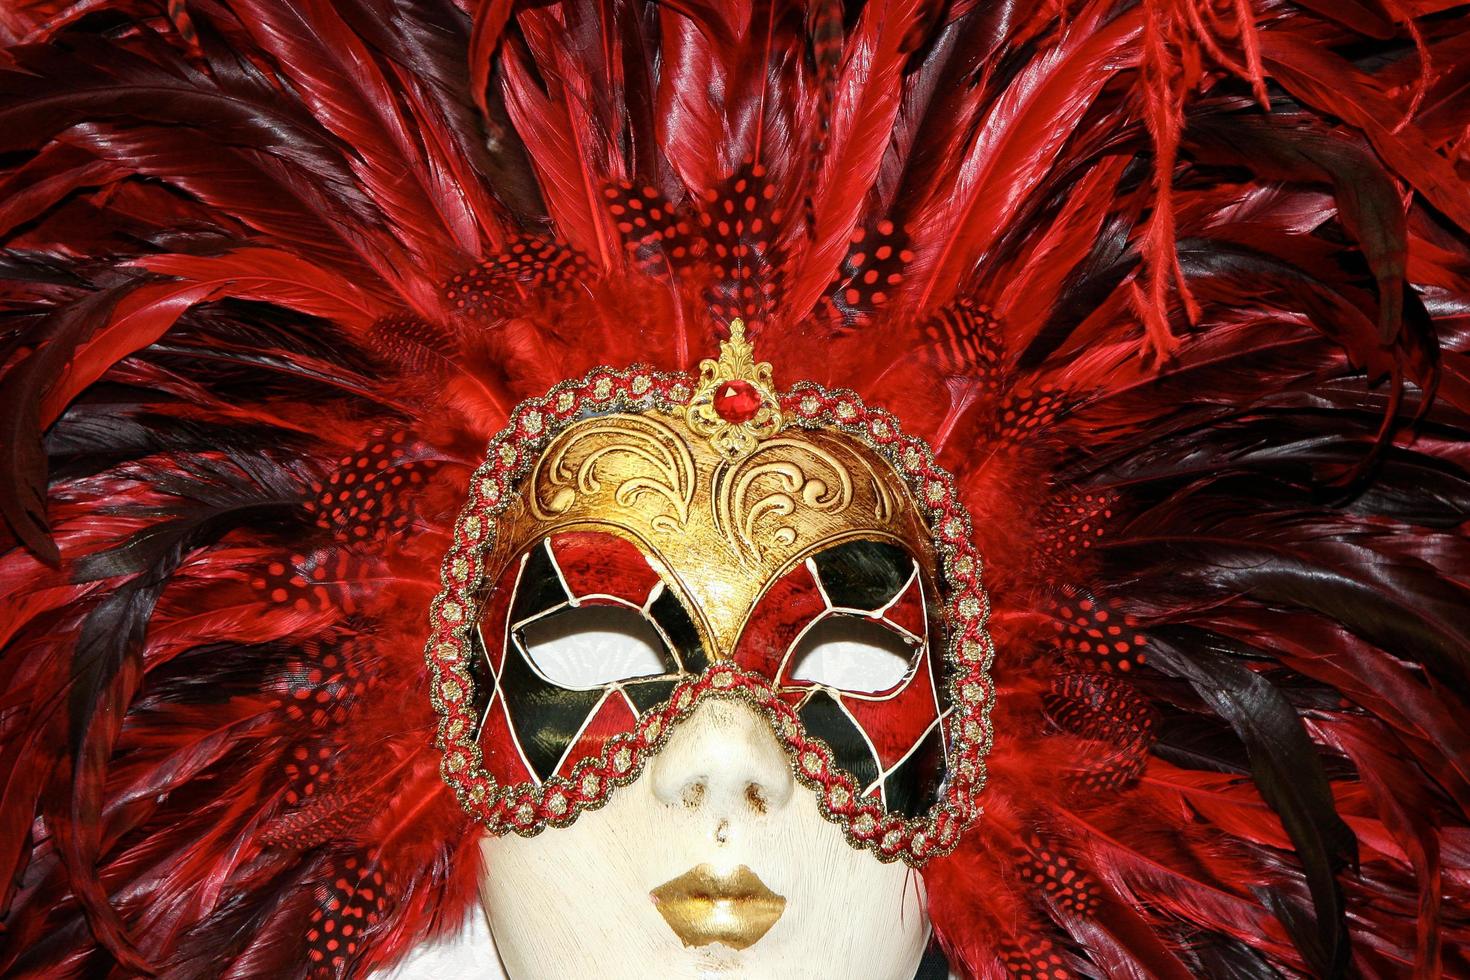 Venice, Italy, 2006. Venetian Mask on Display in a Shop photo